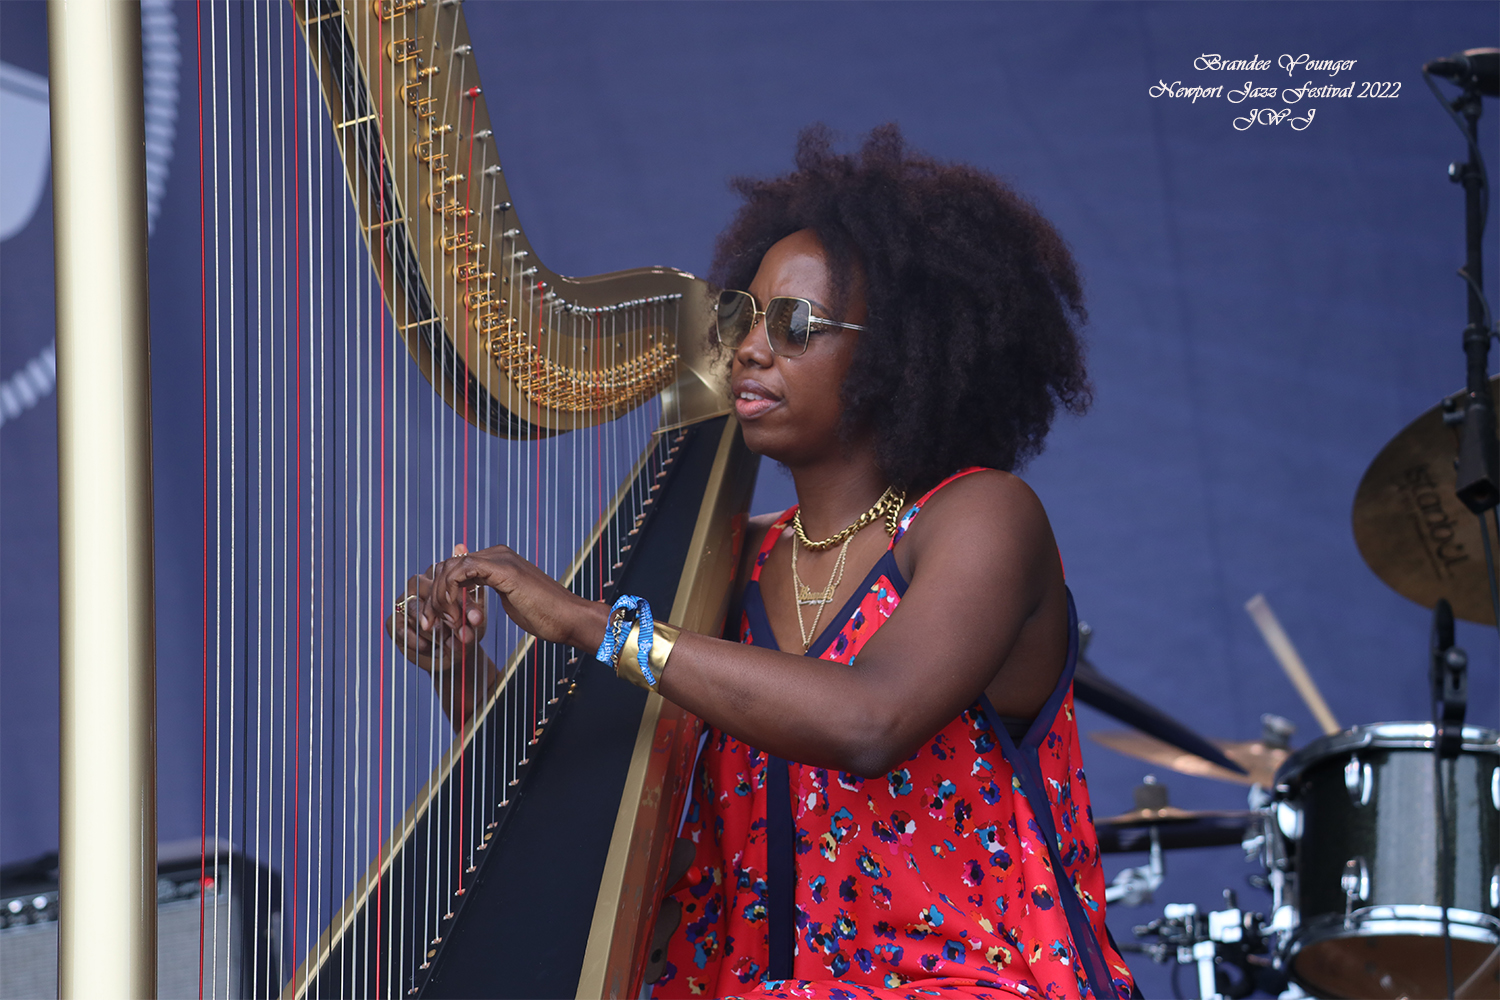 Full color shot of Brandee Younger on stage at the 2022 Newport Jazz Festival in Rhode Island